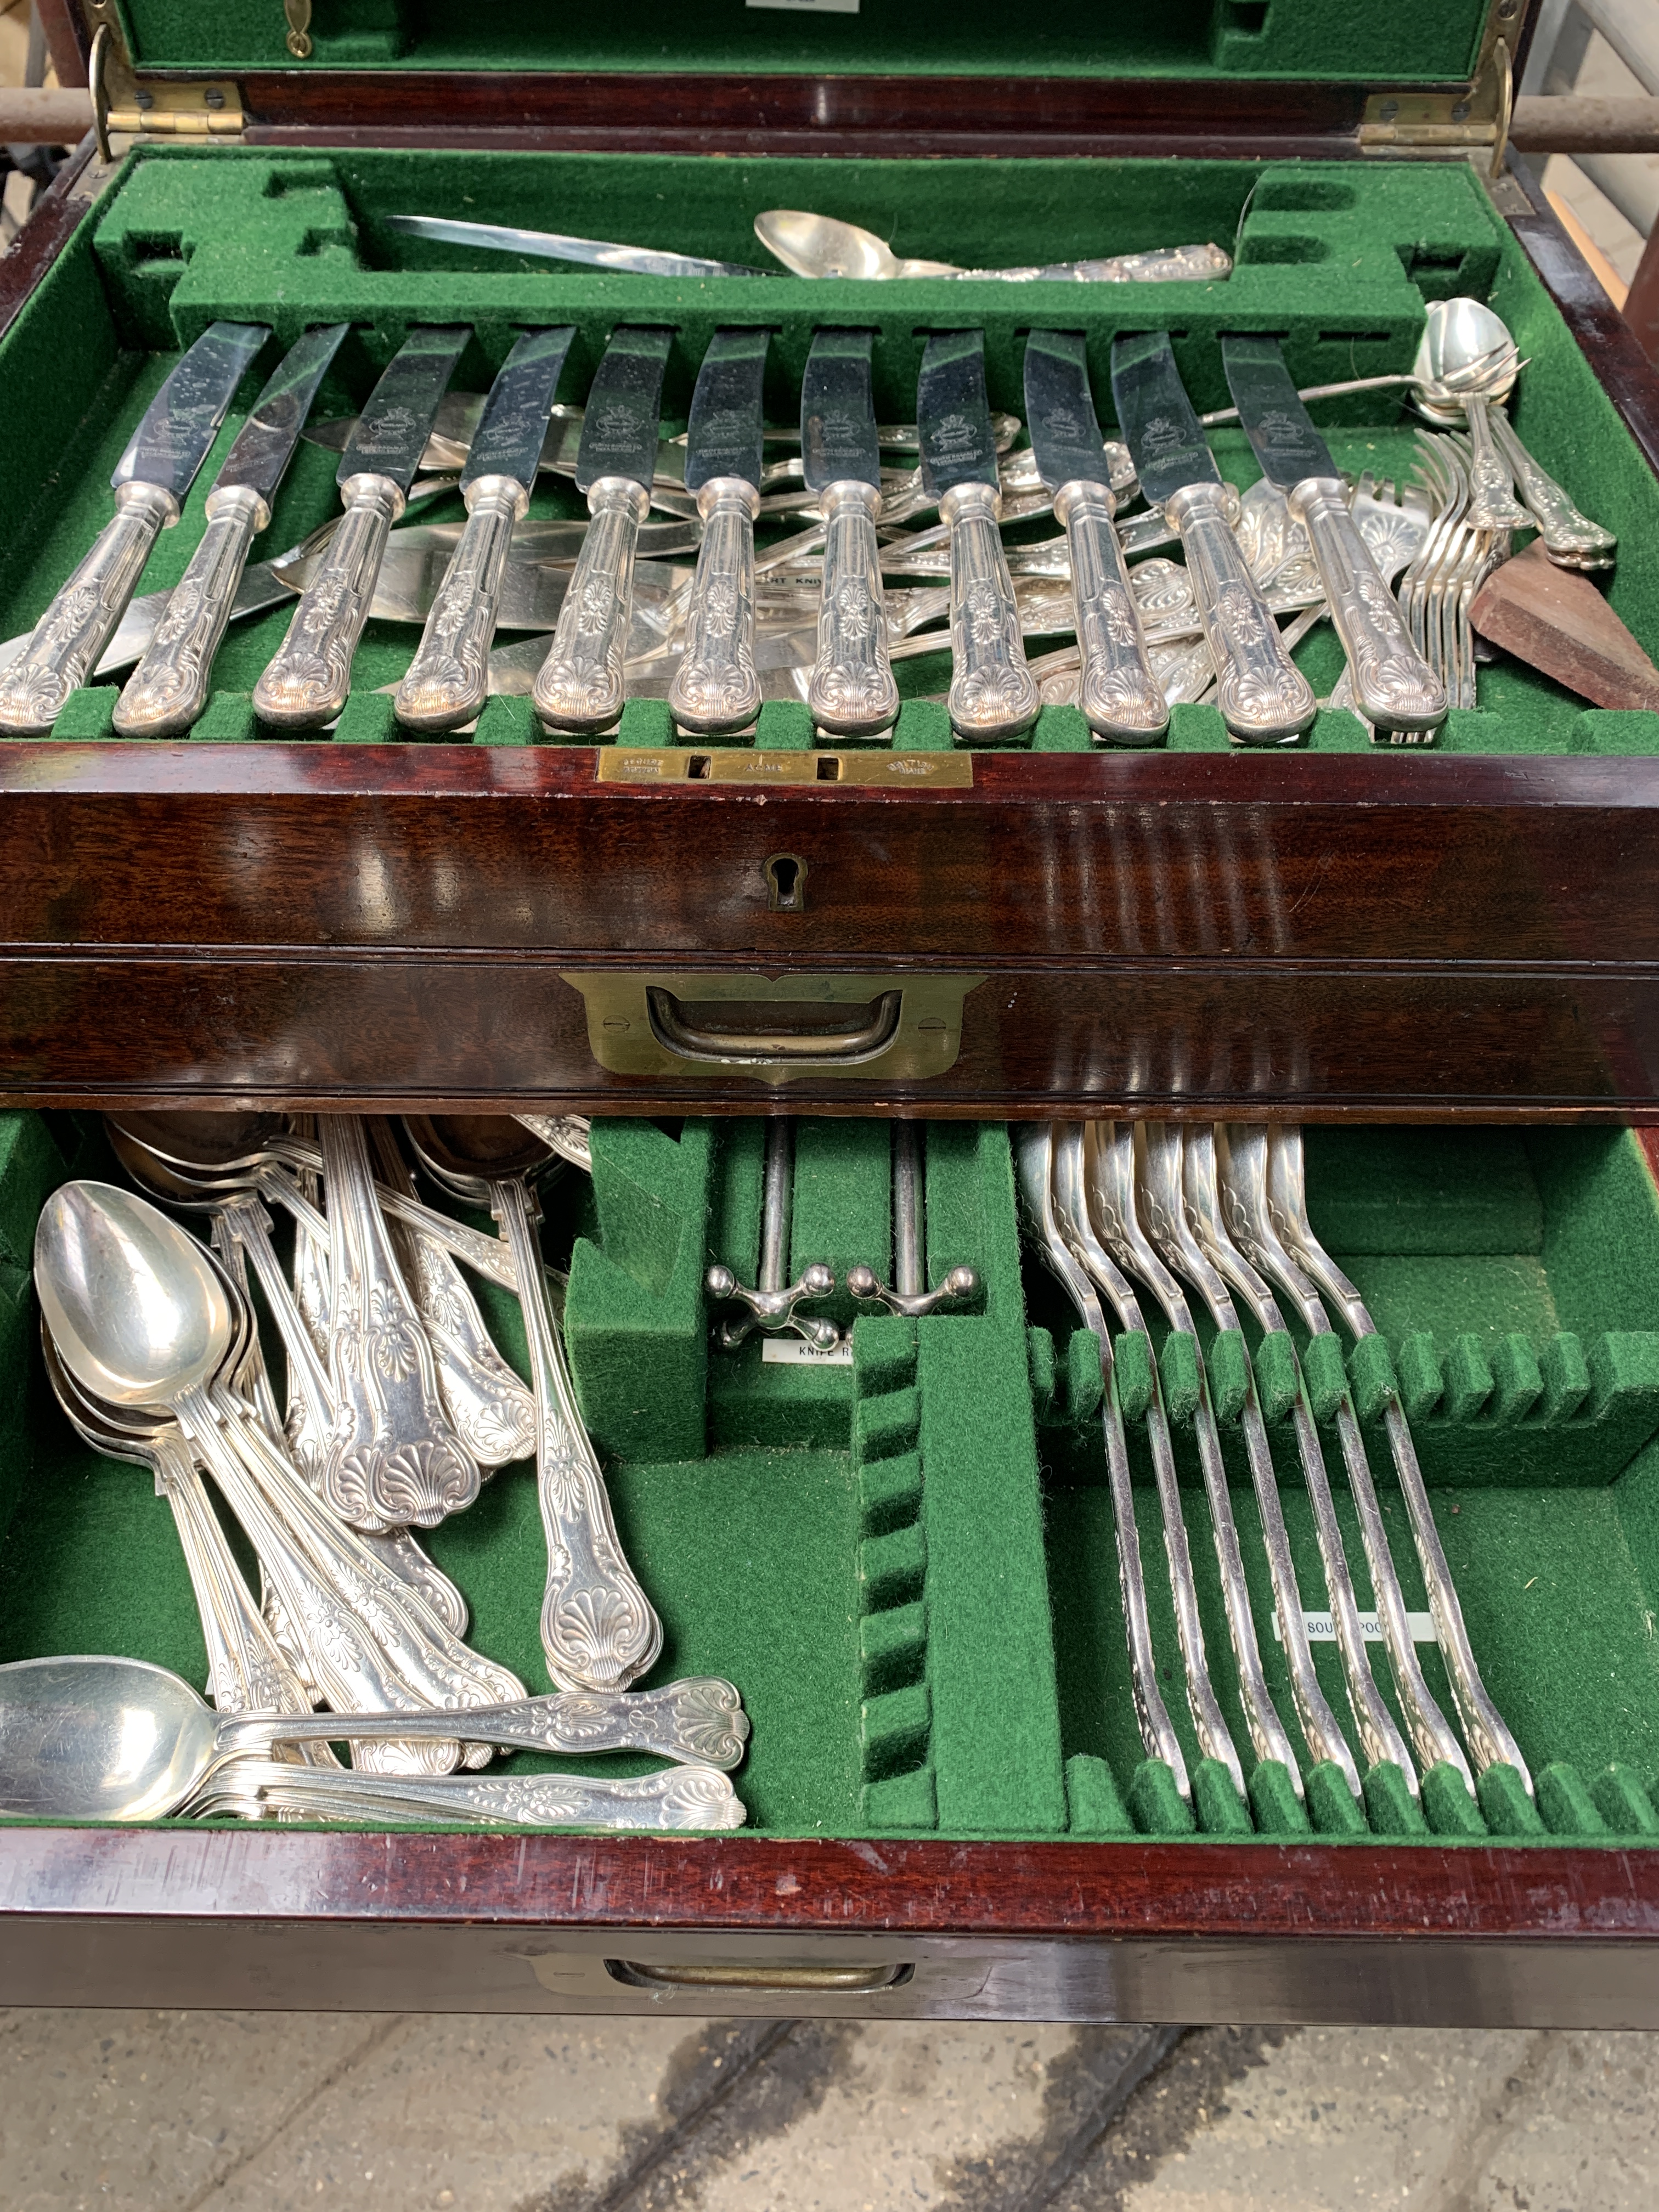 Mahogany brass bound canteen with part set of silver plate cutlery and silver plate galleried tray - Image 7 of 7